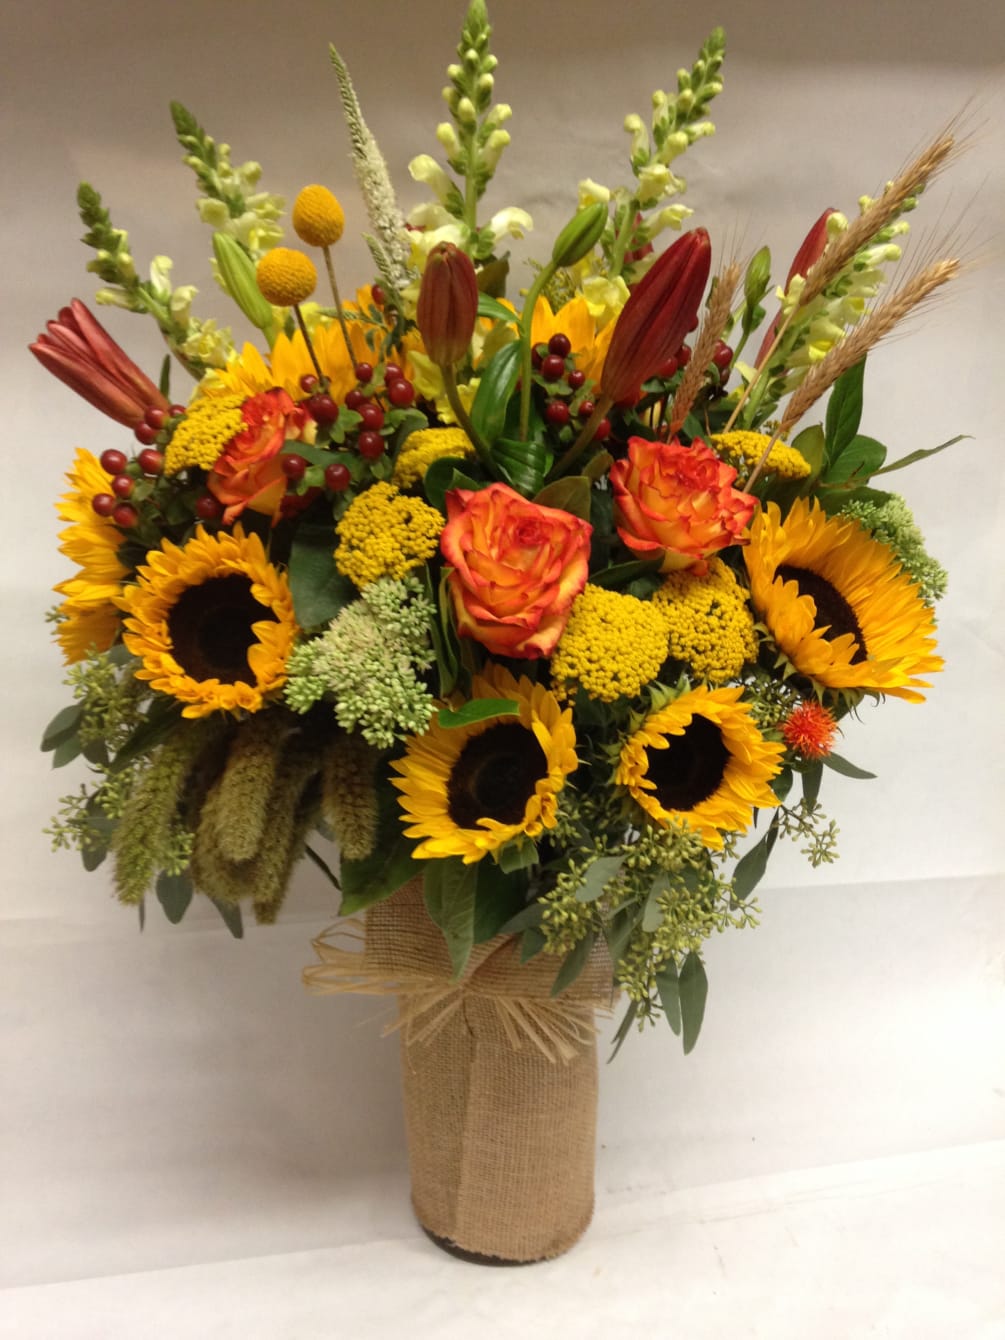 This arrangement comes complete with aziatic lilies, sunflowers, roses, hypericum, billy balls